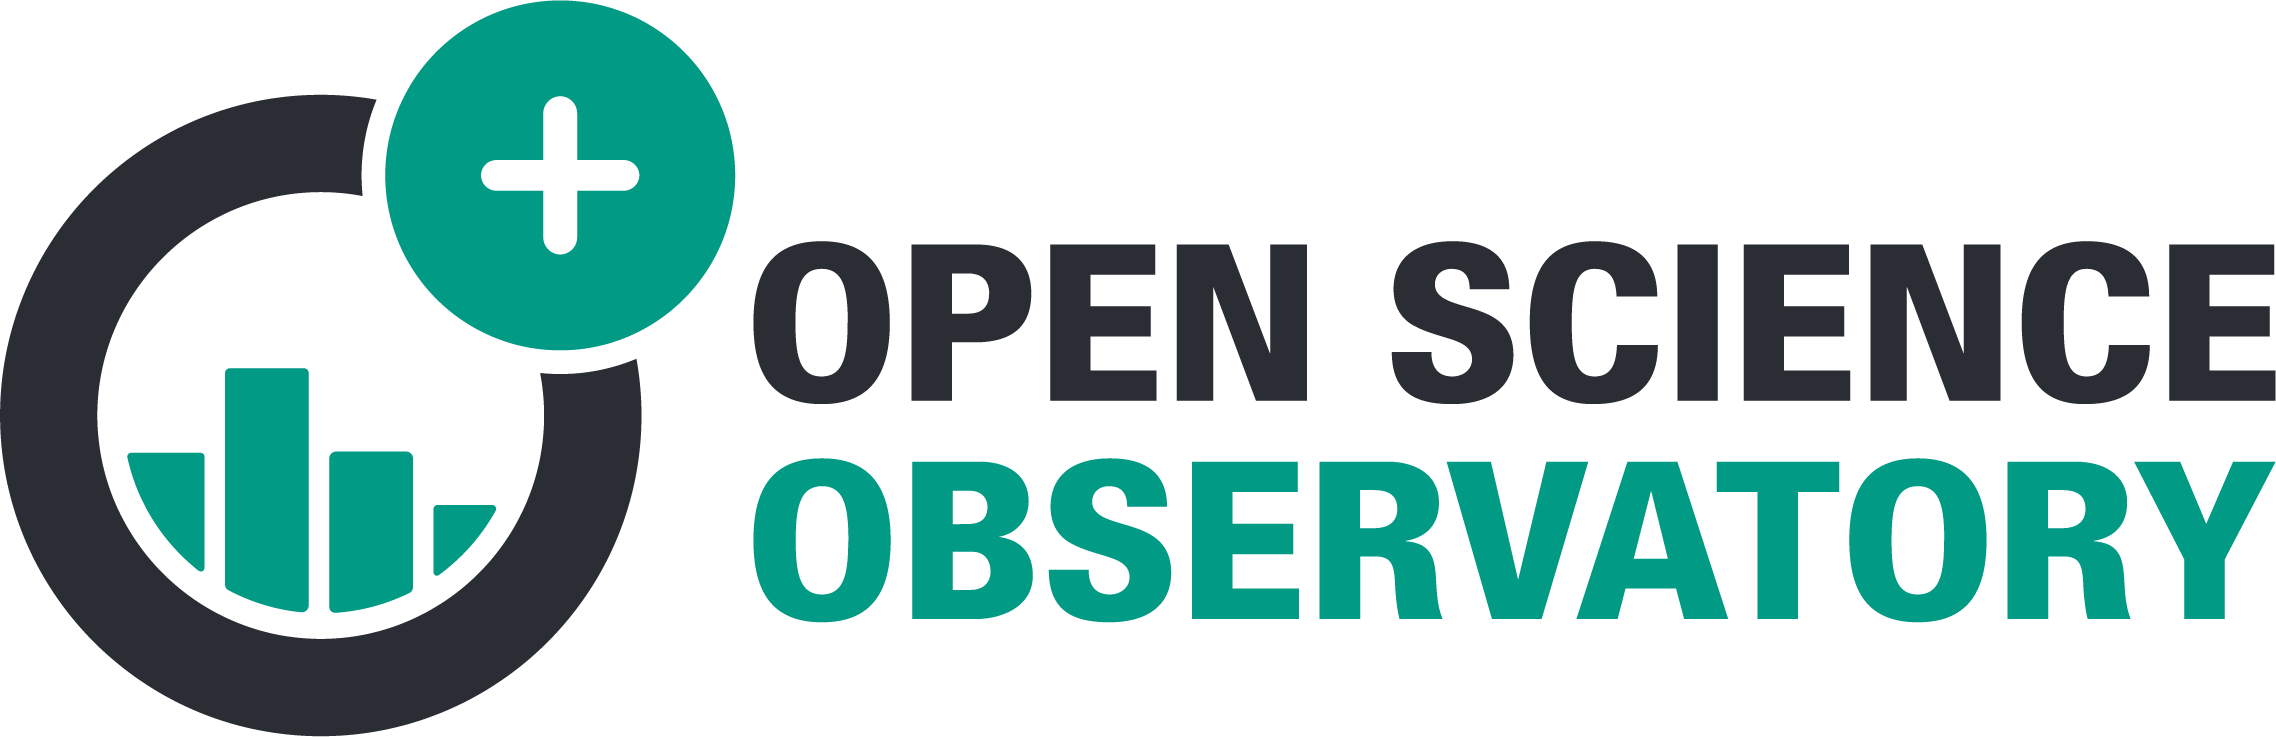 Open Science Observatory